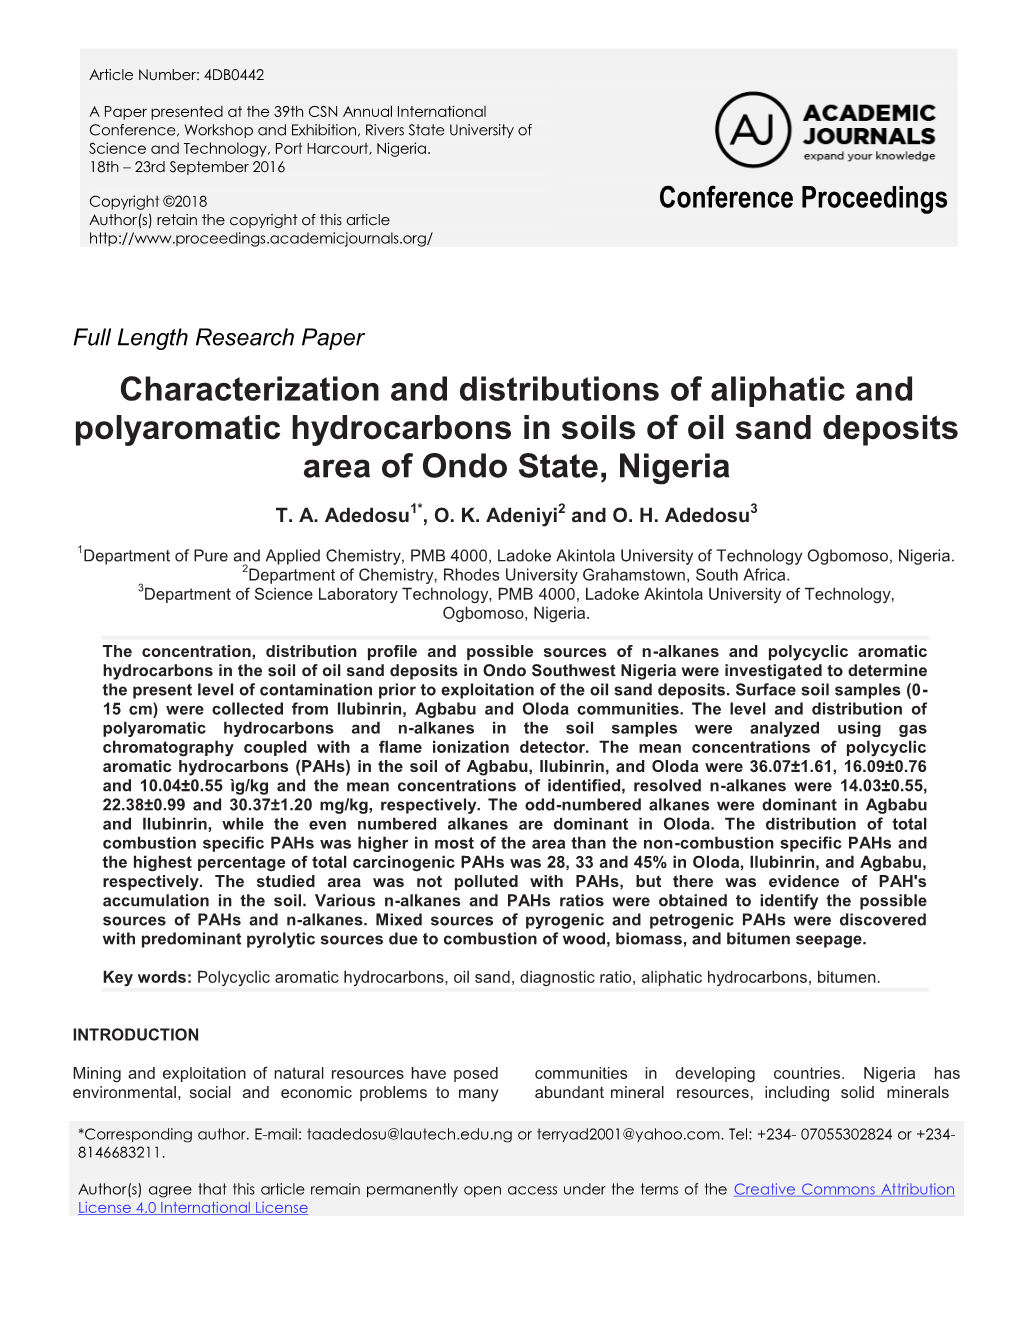 Characterization and Distributions of Aliphatic and Polyaromatic Hydrocarbons in Soils of Oil Sand Deposits Area of Ondo State, Nigeria